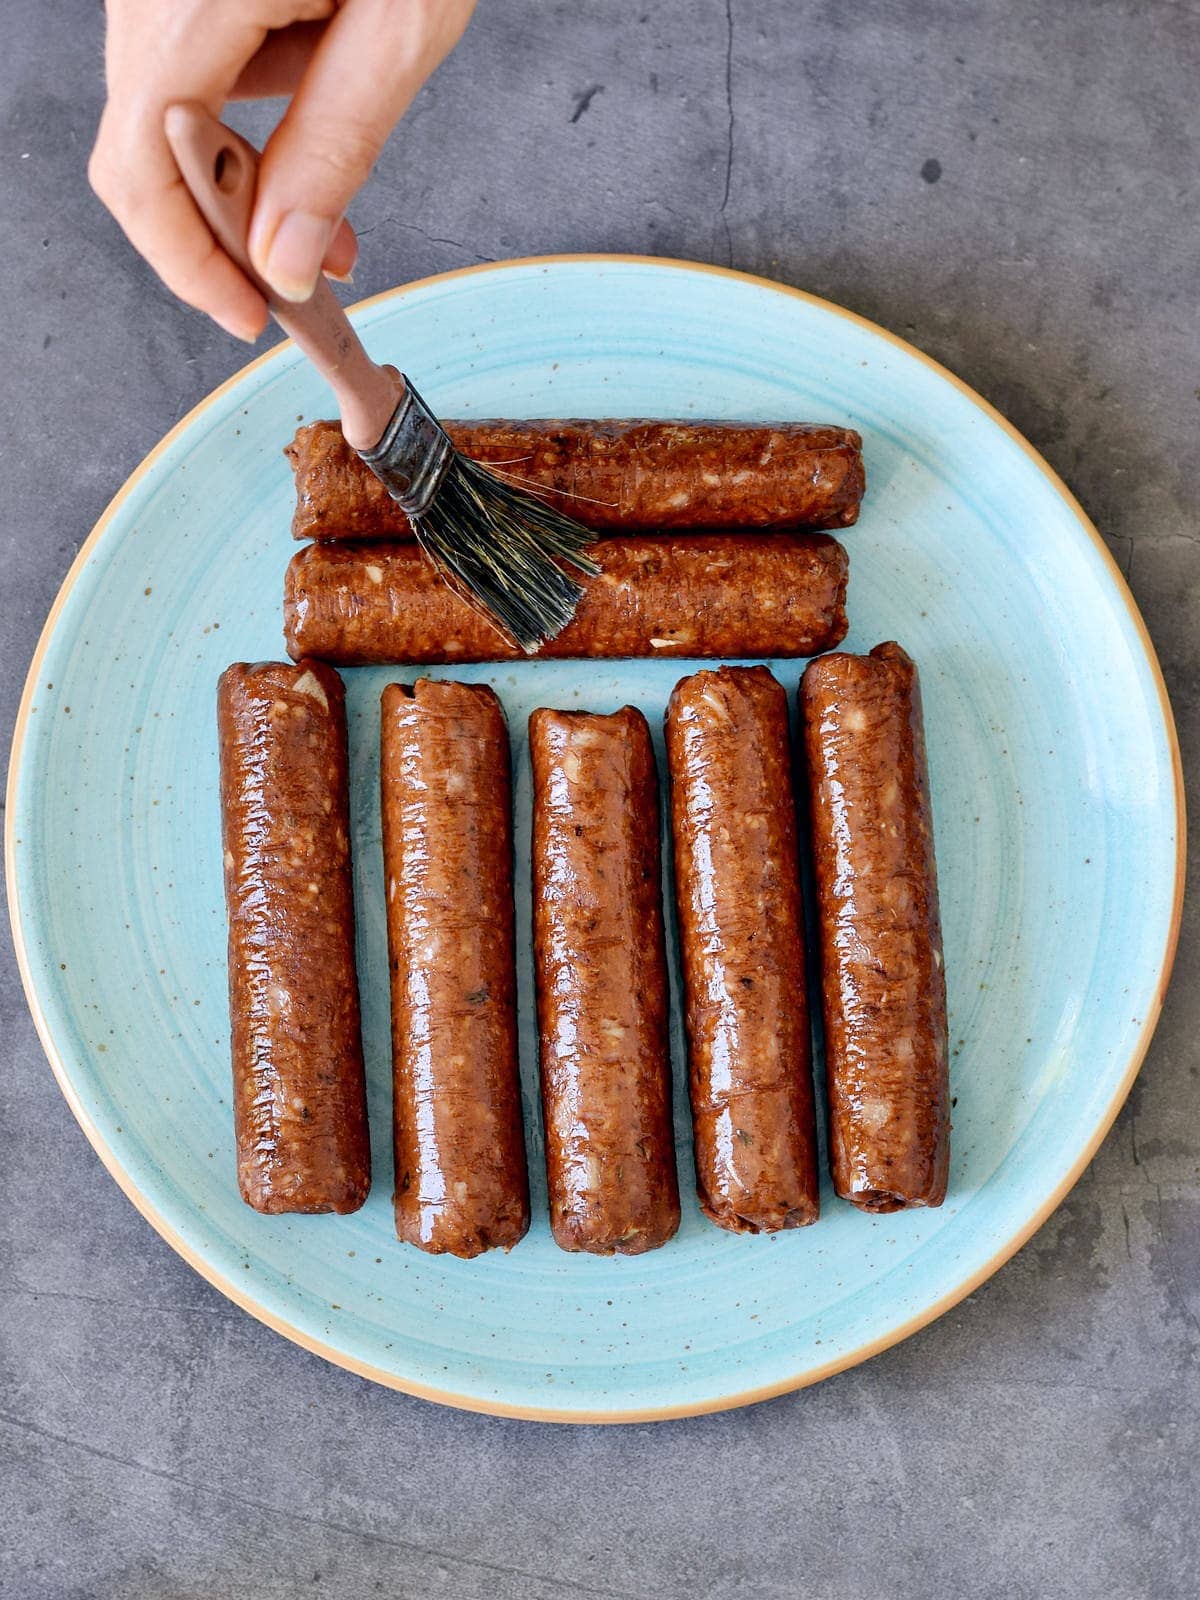 7 vegan sausages on plate brushed with oil